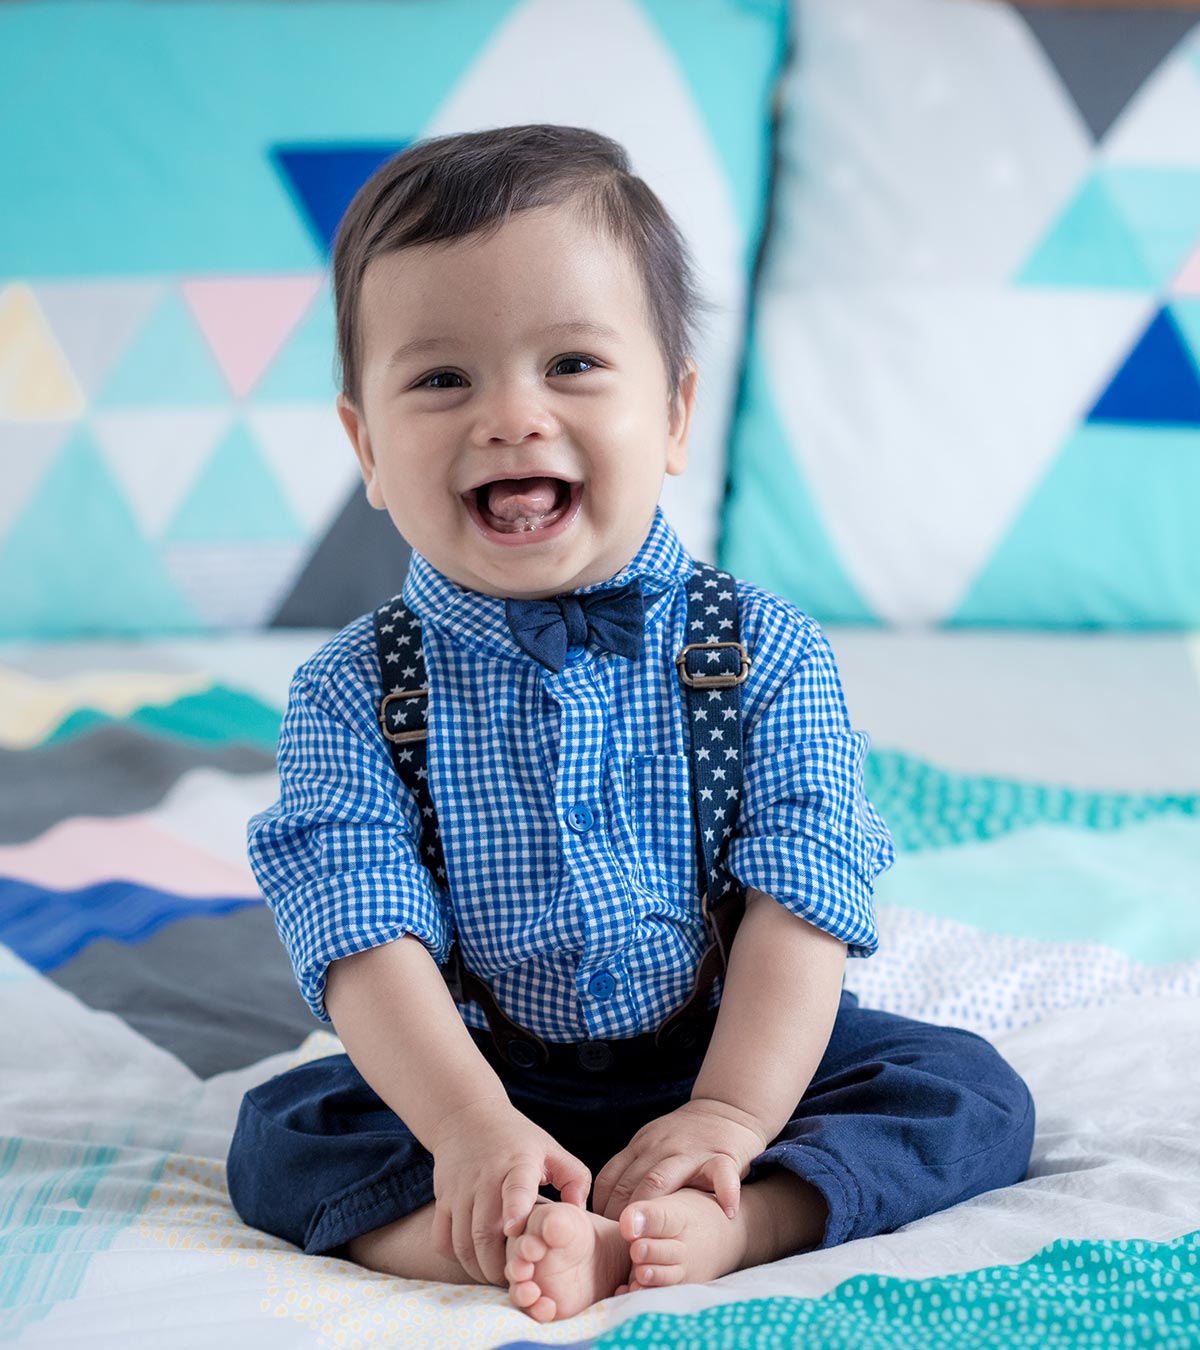 11-Month-Old Baby's Development Milestones & Tips To Follow